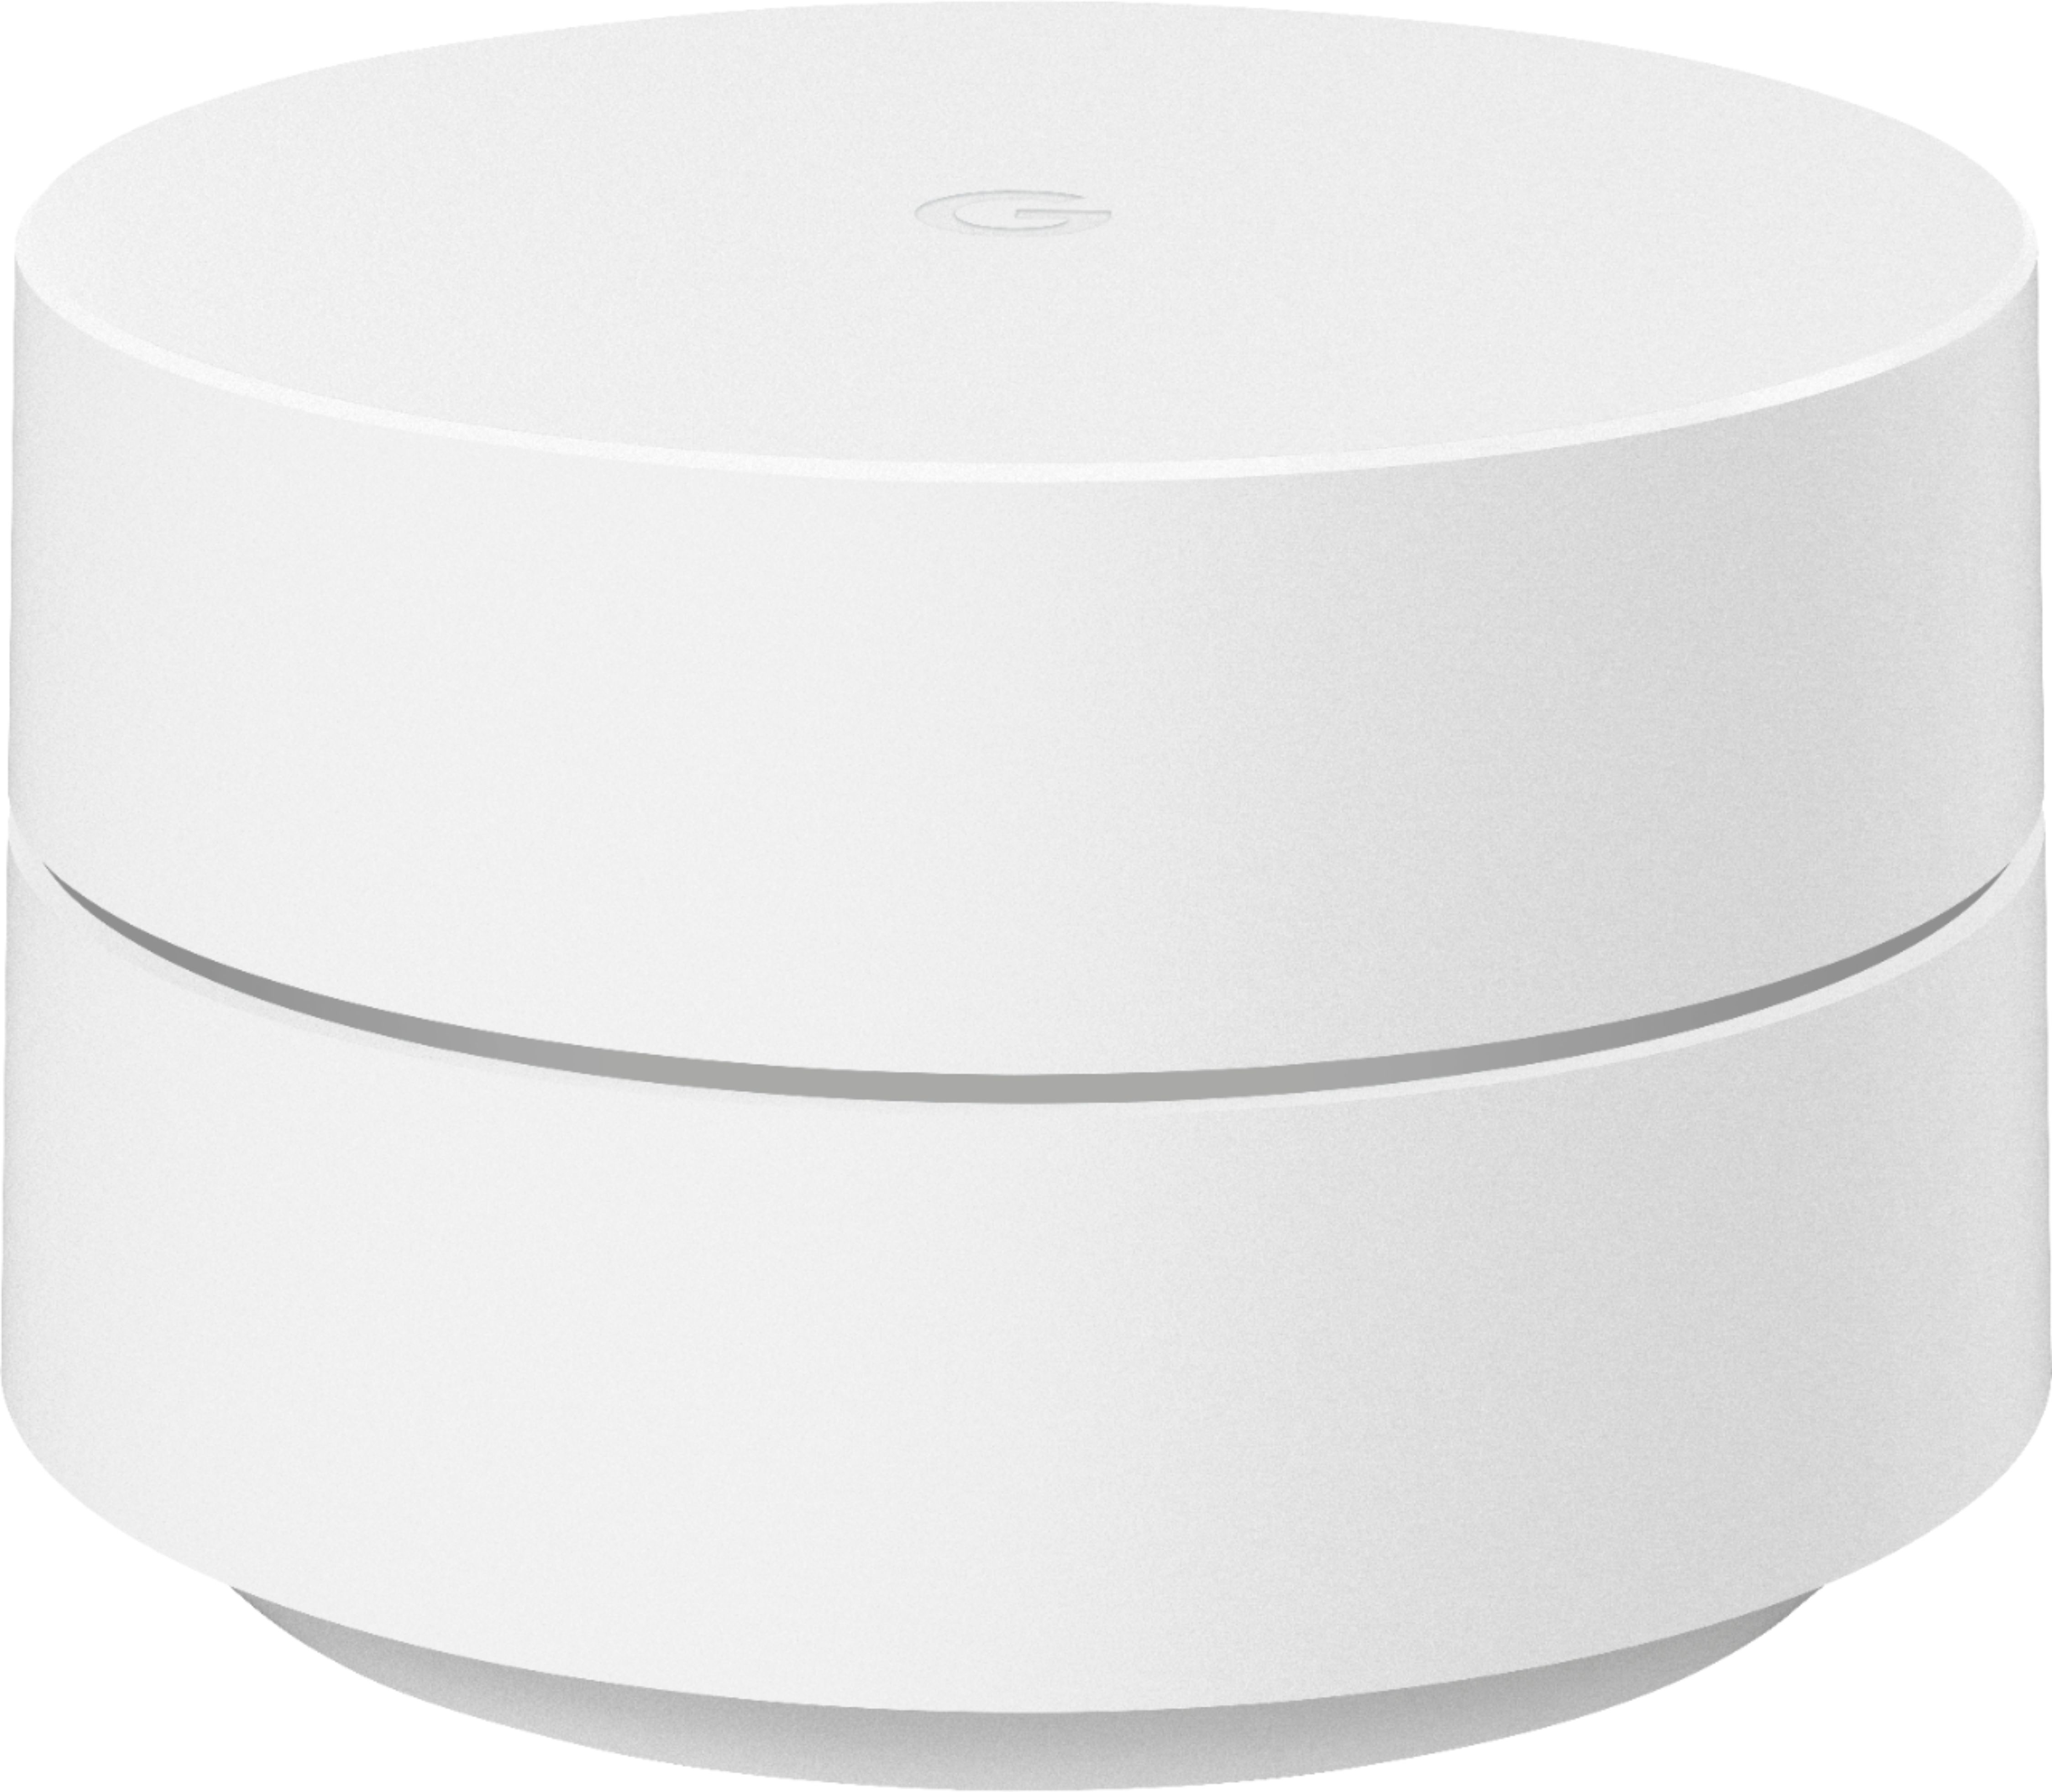 Left View: Google - Wifi - Mesh Router (AC1200) - 3 pack - White